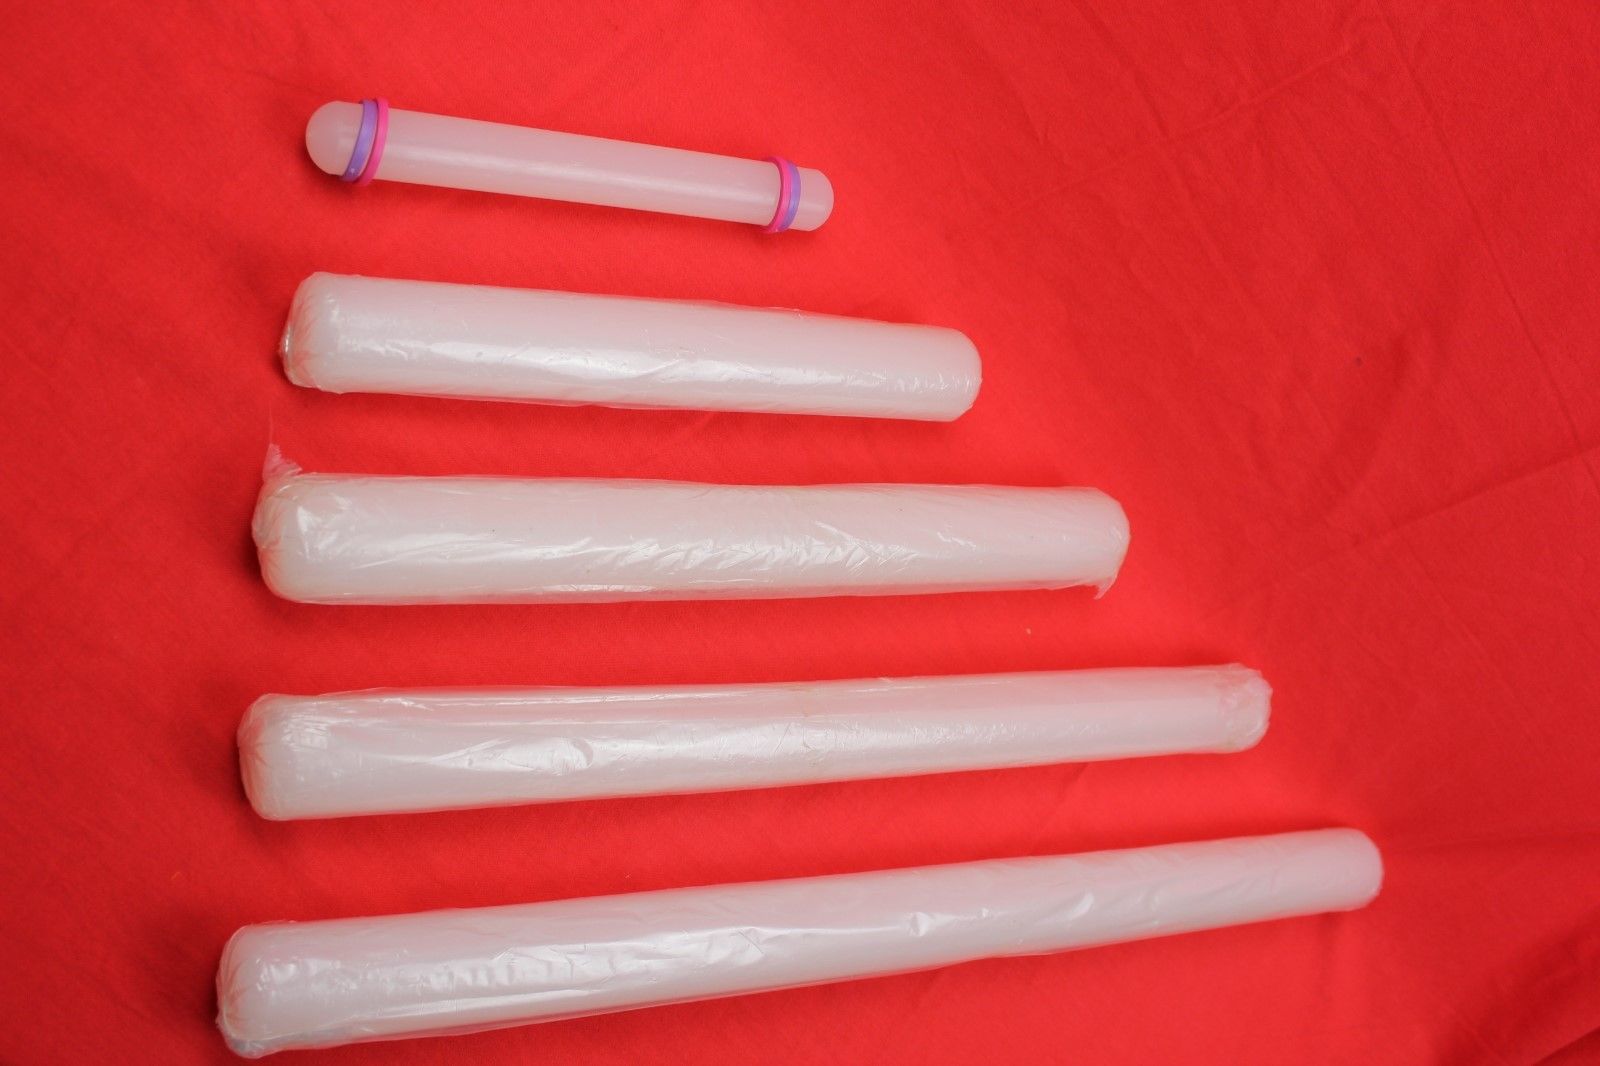 attachment-https://www.cupcakeaddicts.co.uk/wp-content/uploads/imported/7/Plastic-Rolling-Pin-8-Various-sizes-Cake-Pastry-UK-SELLER-Same-day-dispatch-323097813287-5.jpg